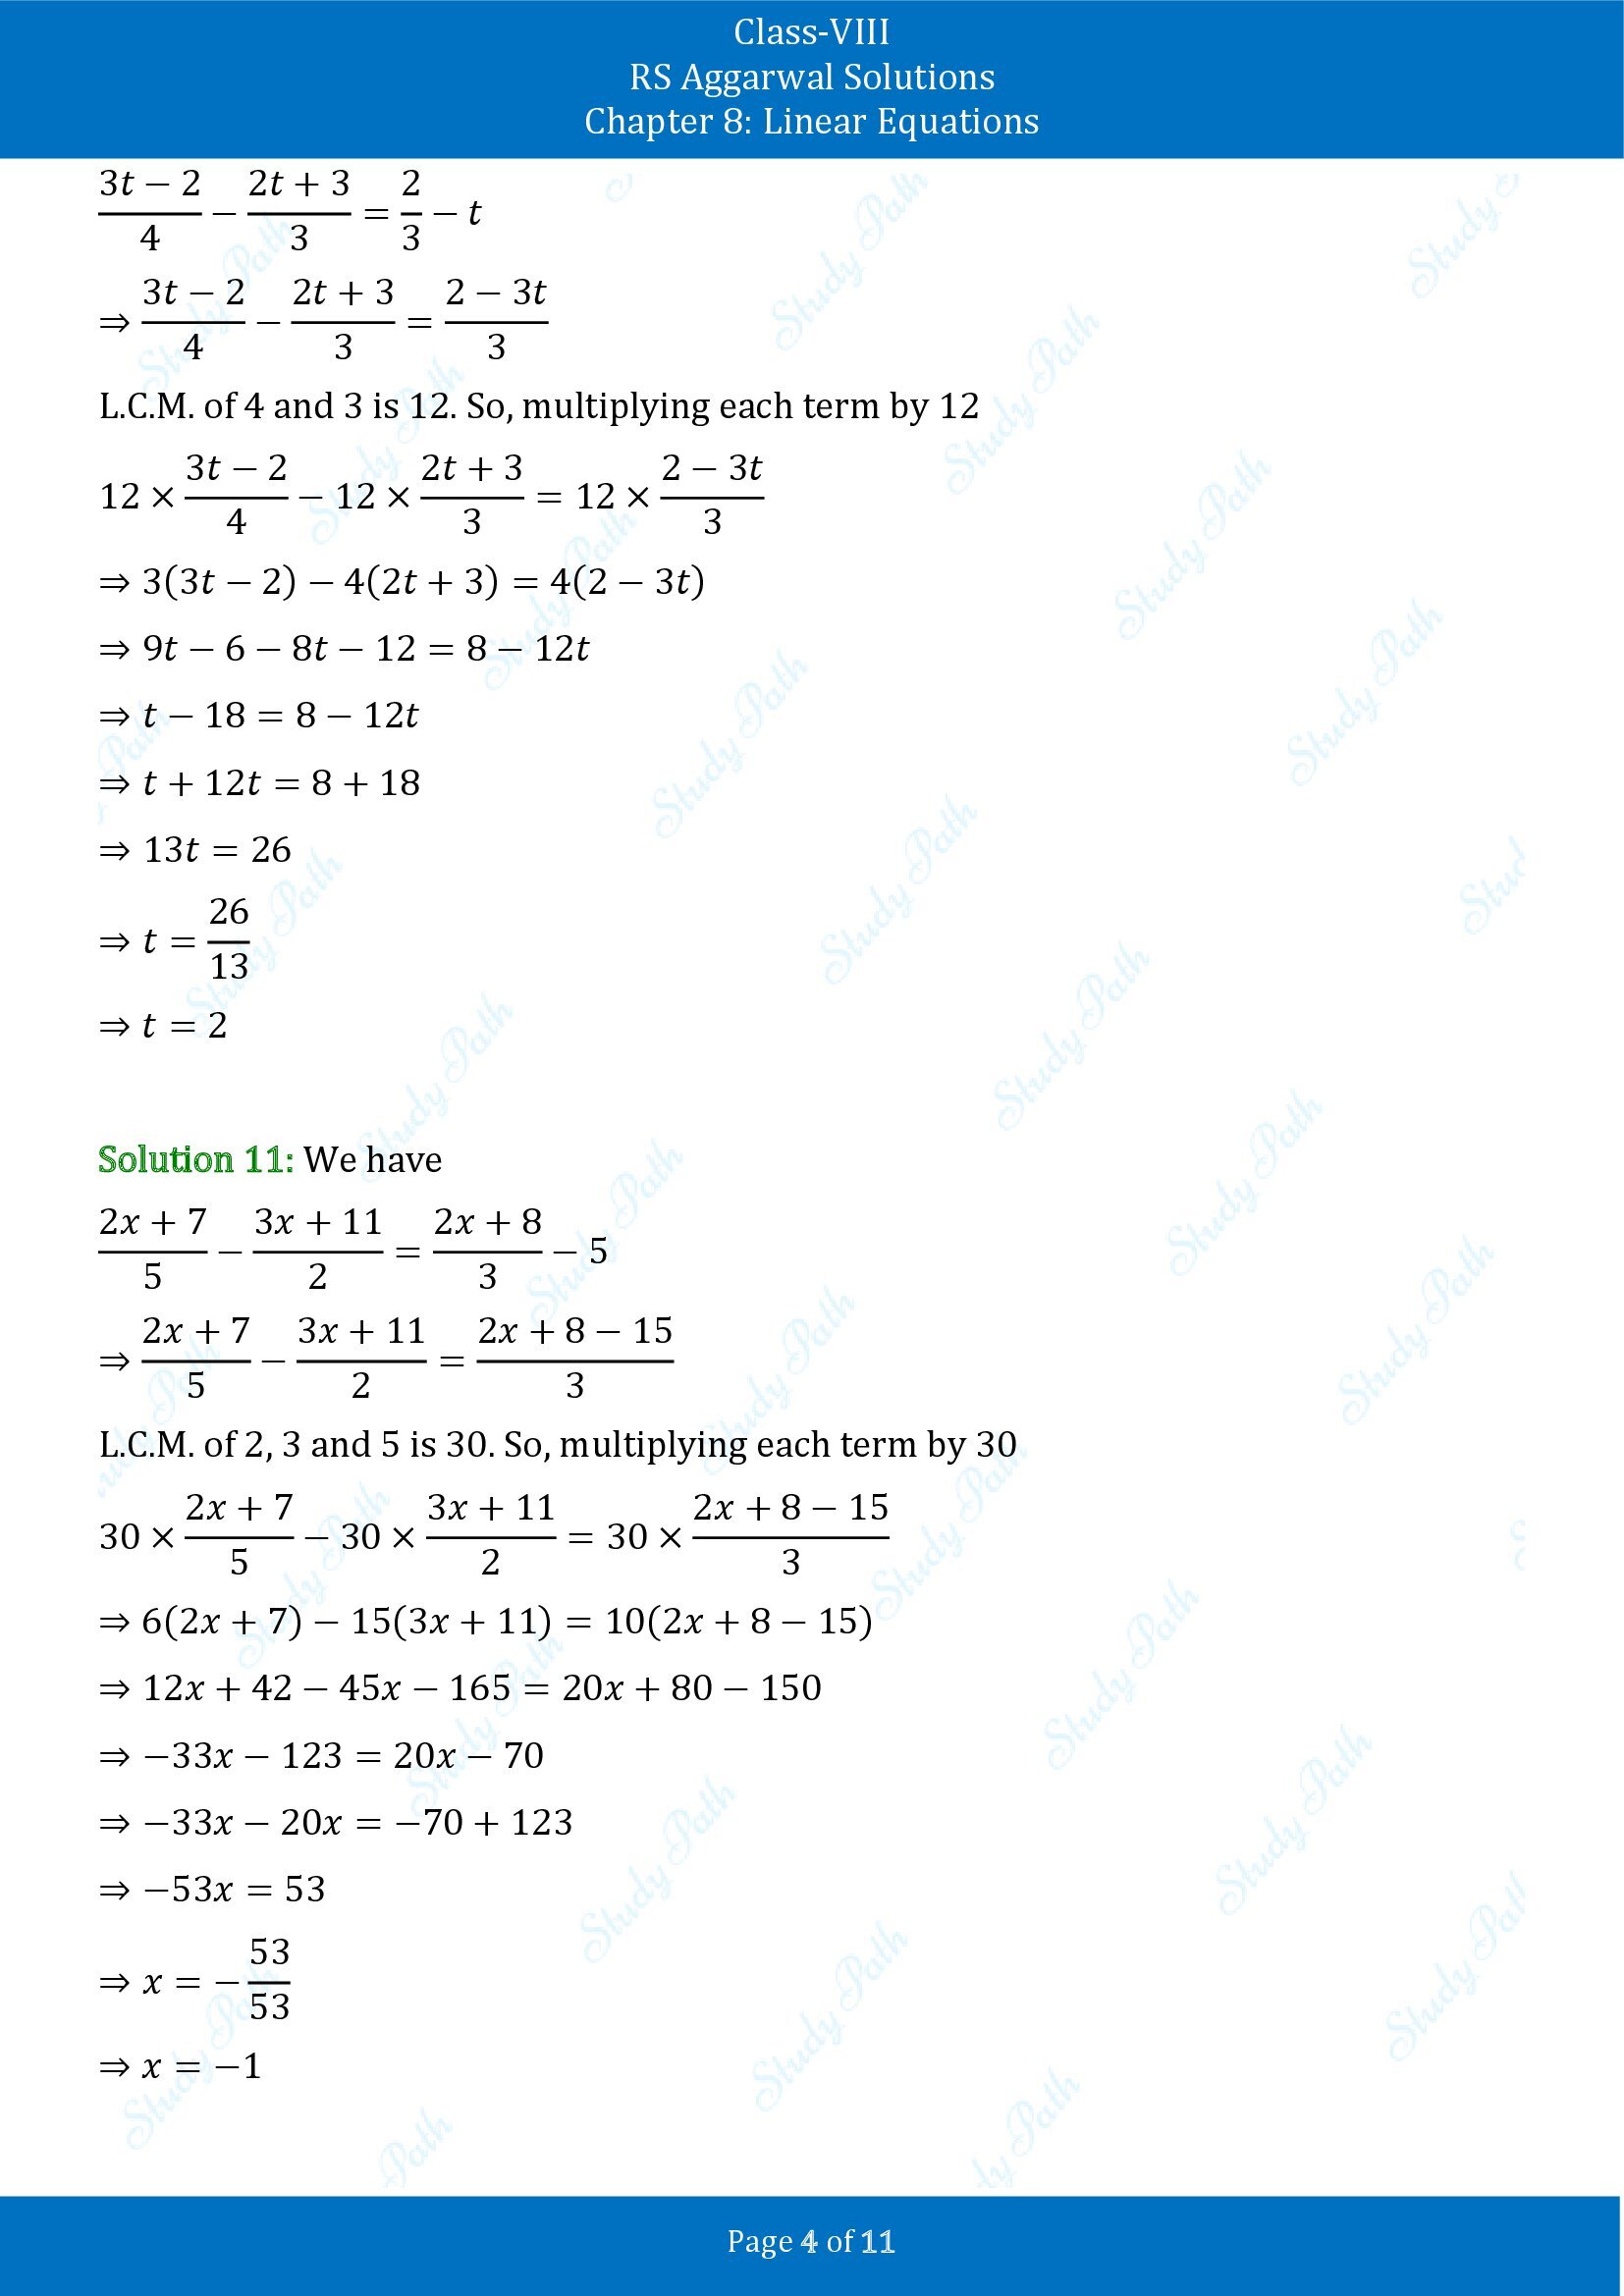 RS Aggarwal Solutions Class 8 Chapter 8 Linear Equations Exercise 8A 00004